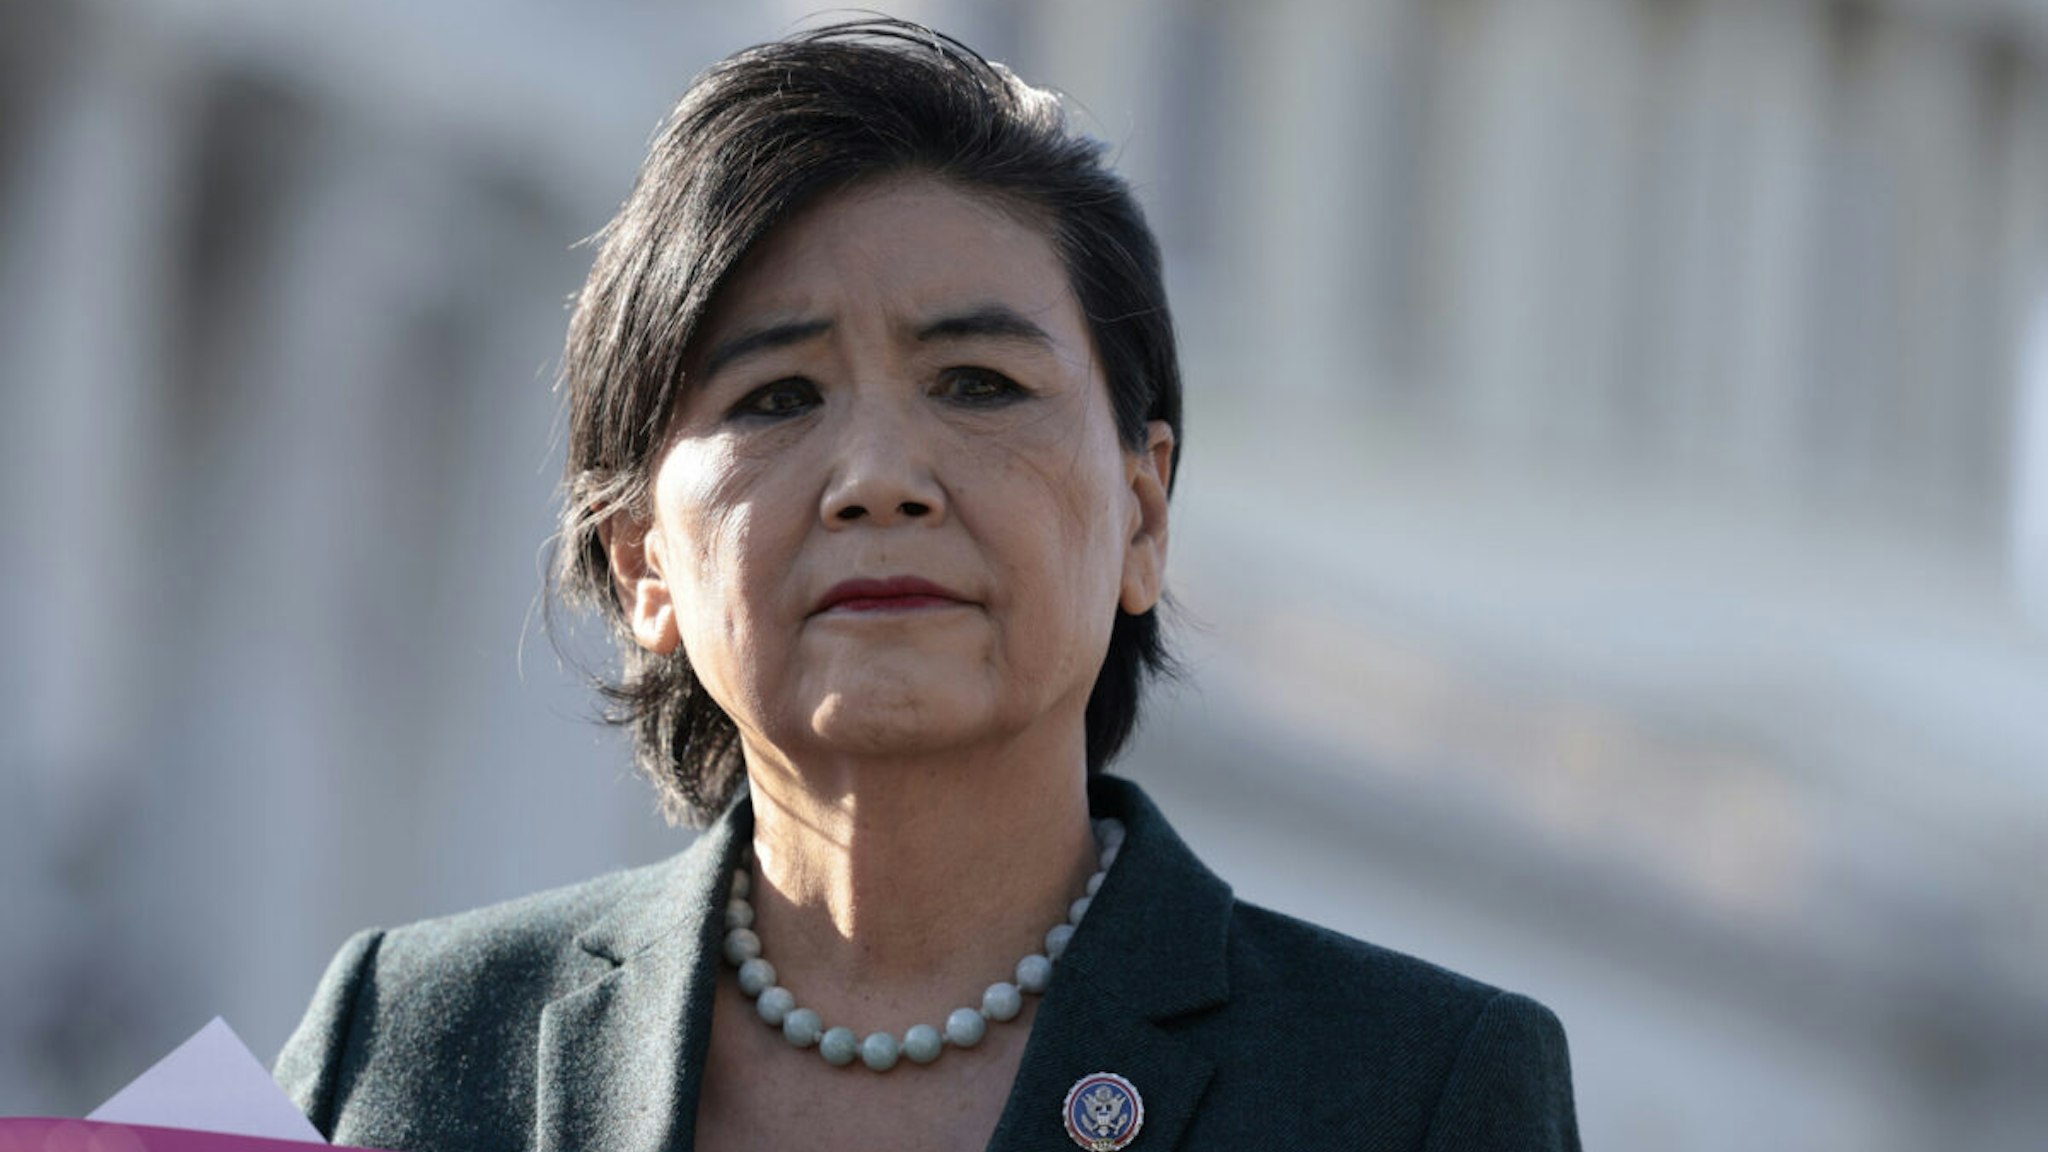 Rep. Judy Chu (D-CA) speaks at a news conference outside of the U.S. Capitol Building on May 10, 2022 in Washington, DC.